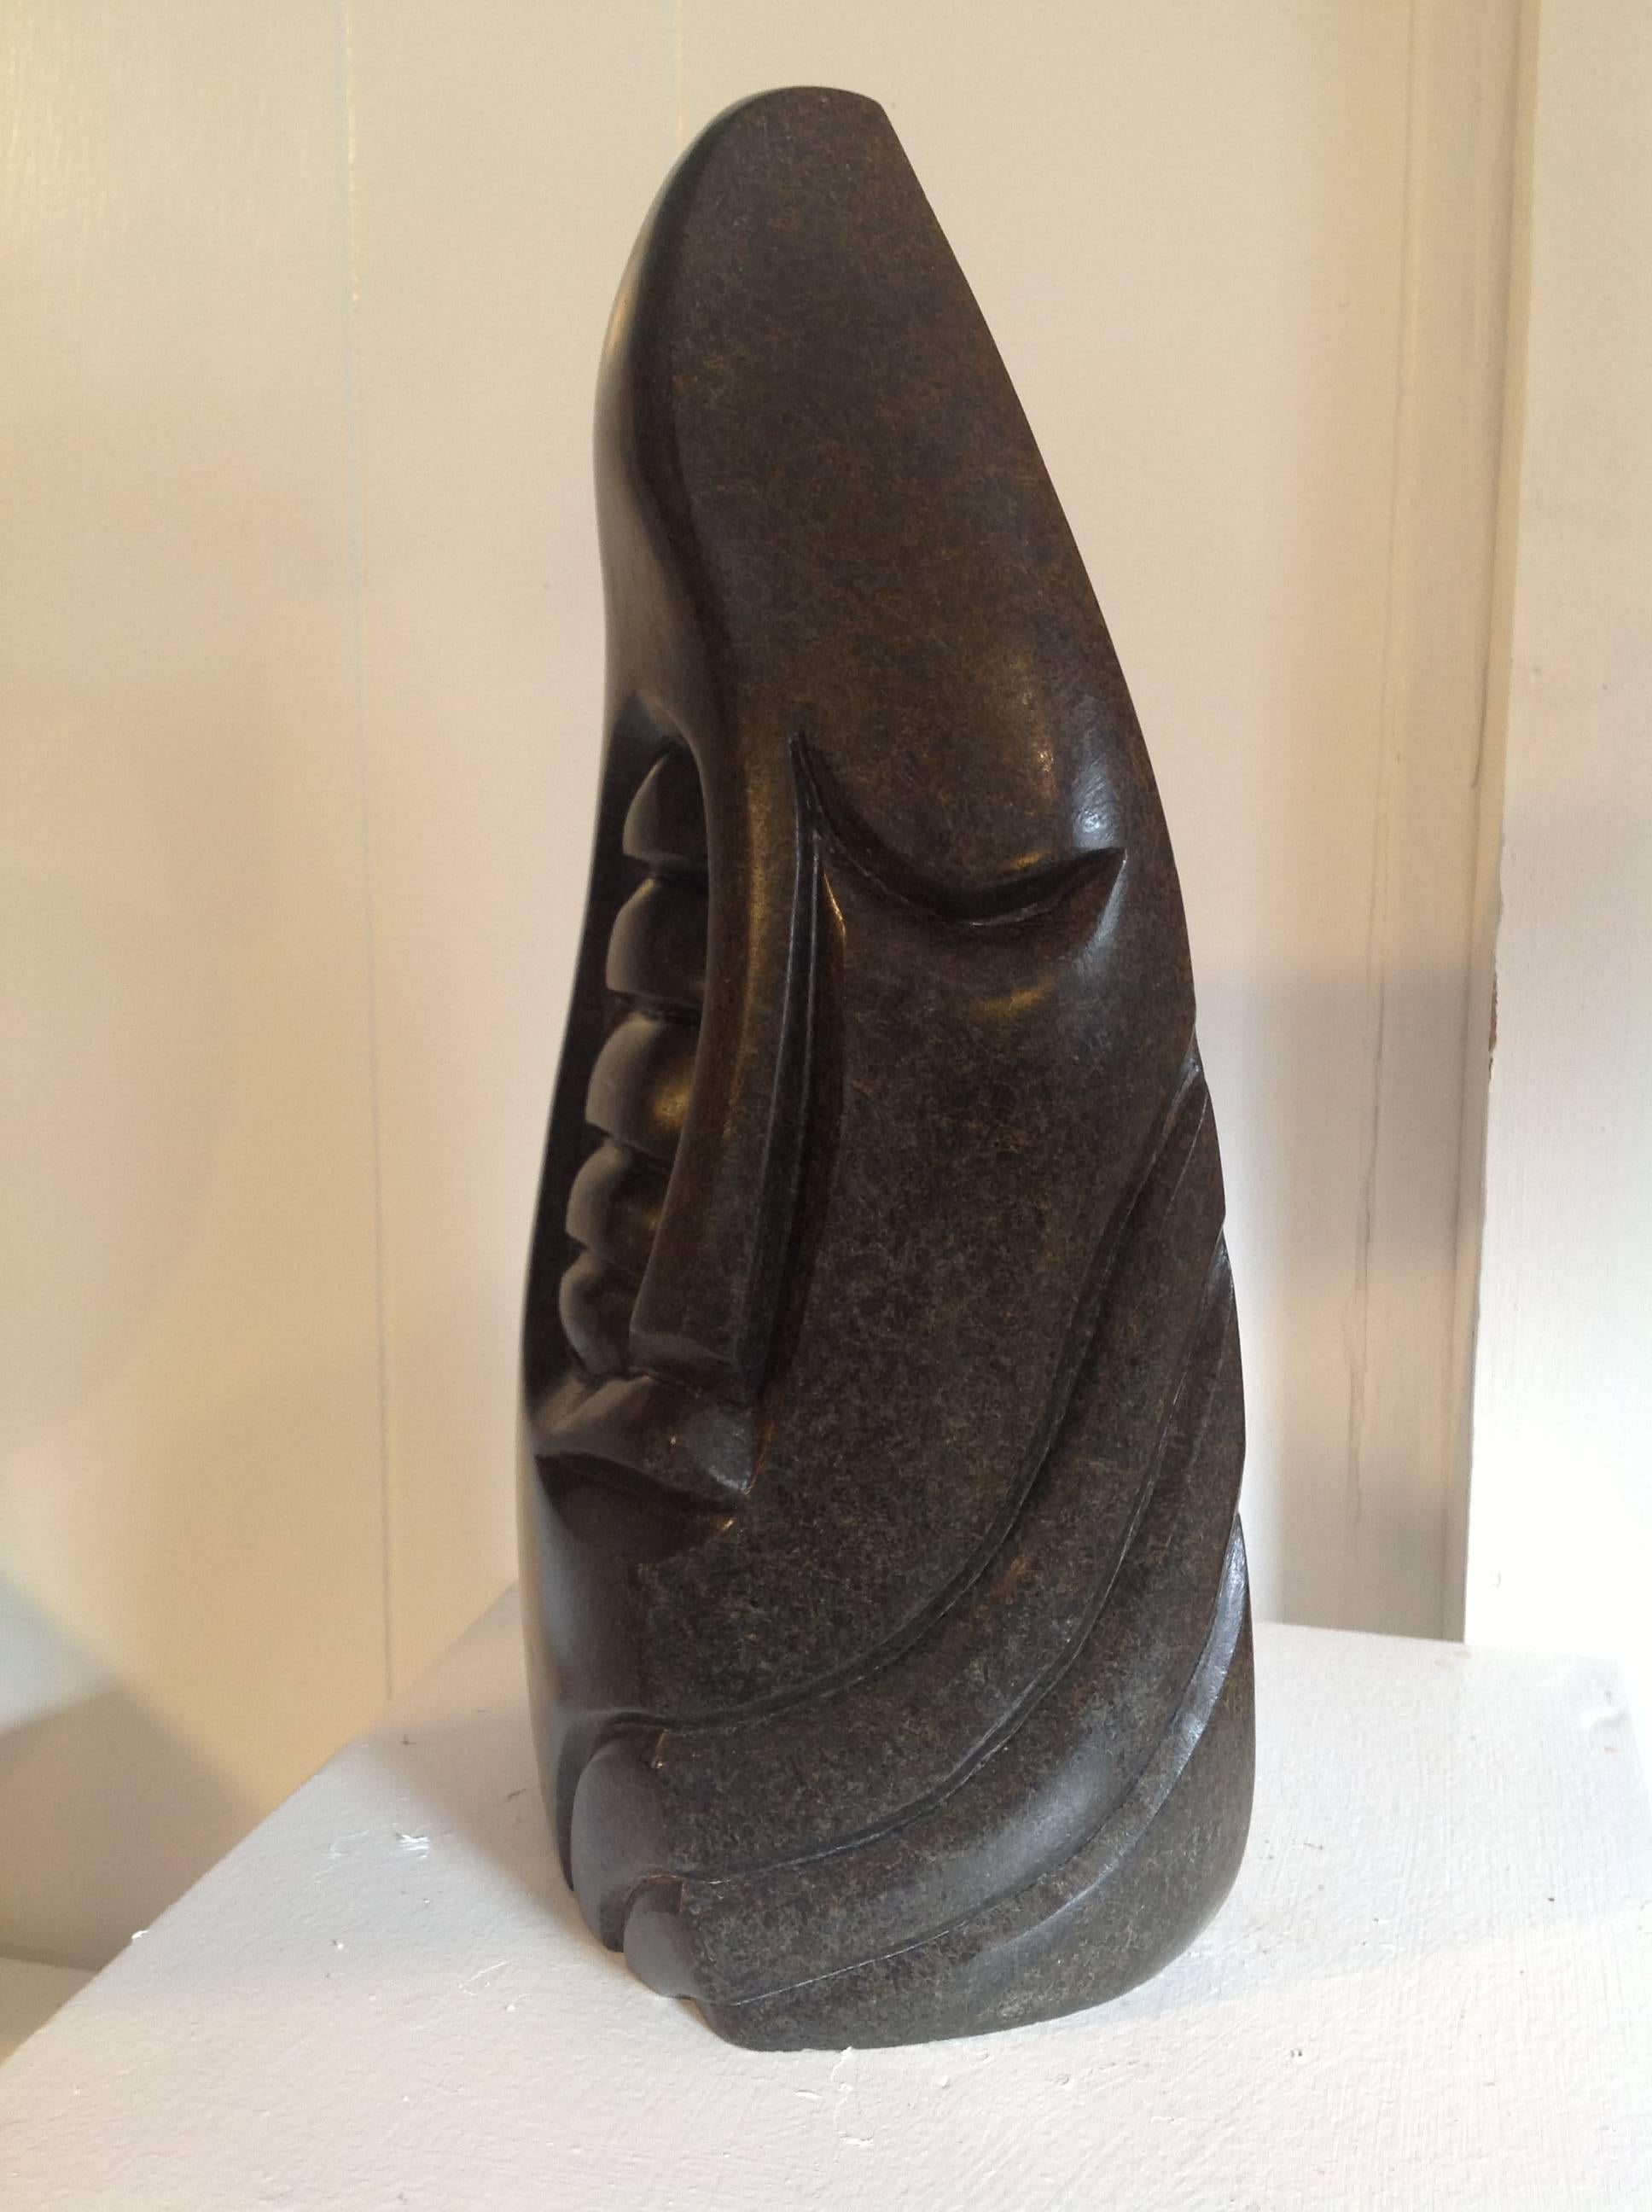 Late 20th Century African Shona Sculpture Titled 